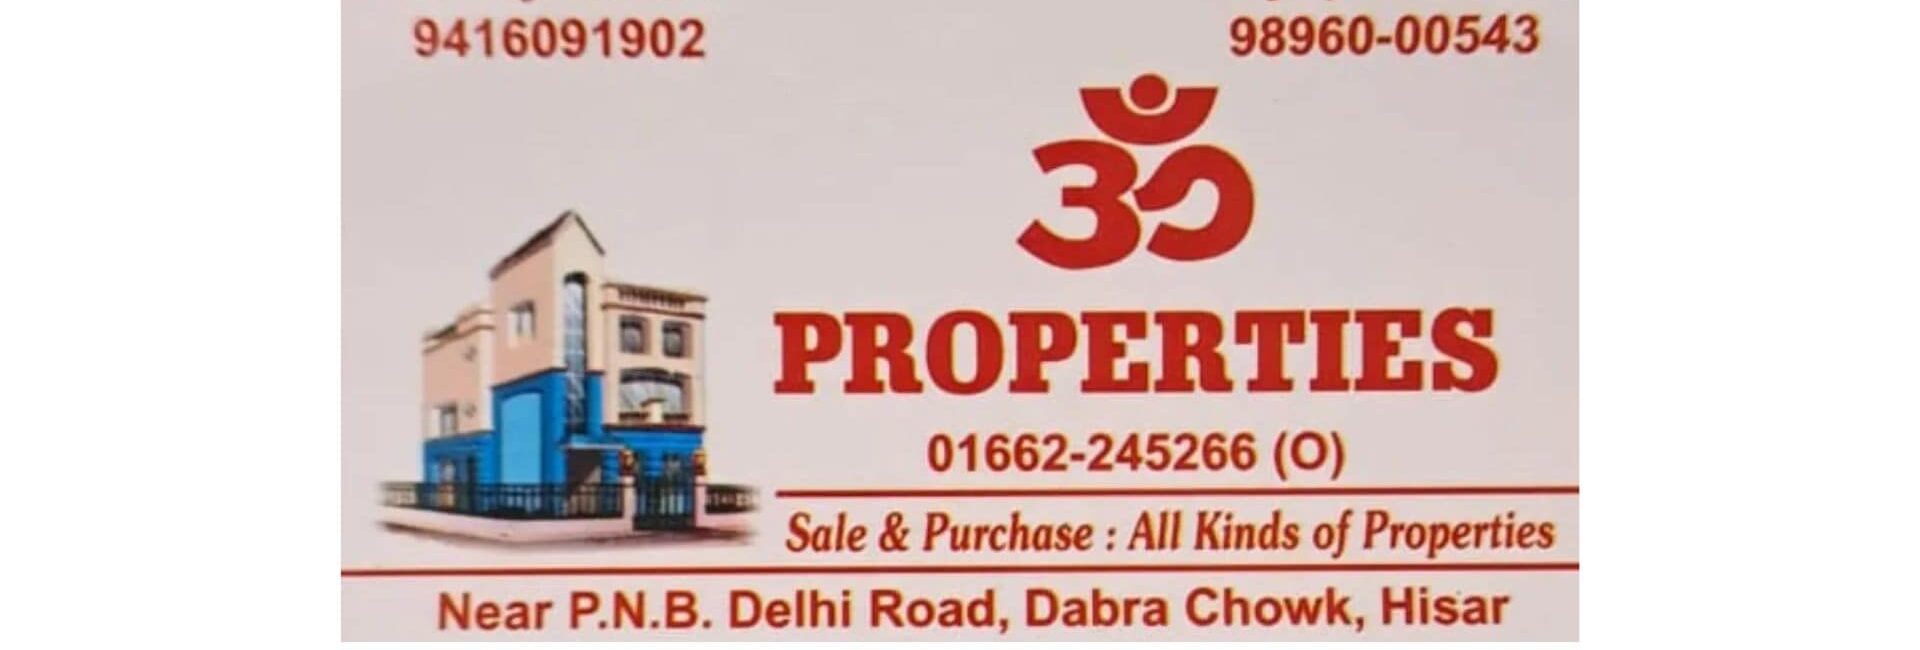 Om Properties - Real estate agent in Hisar